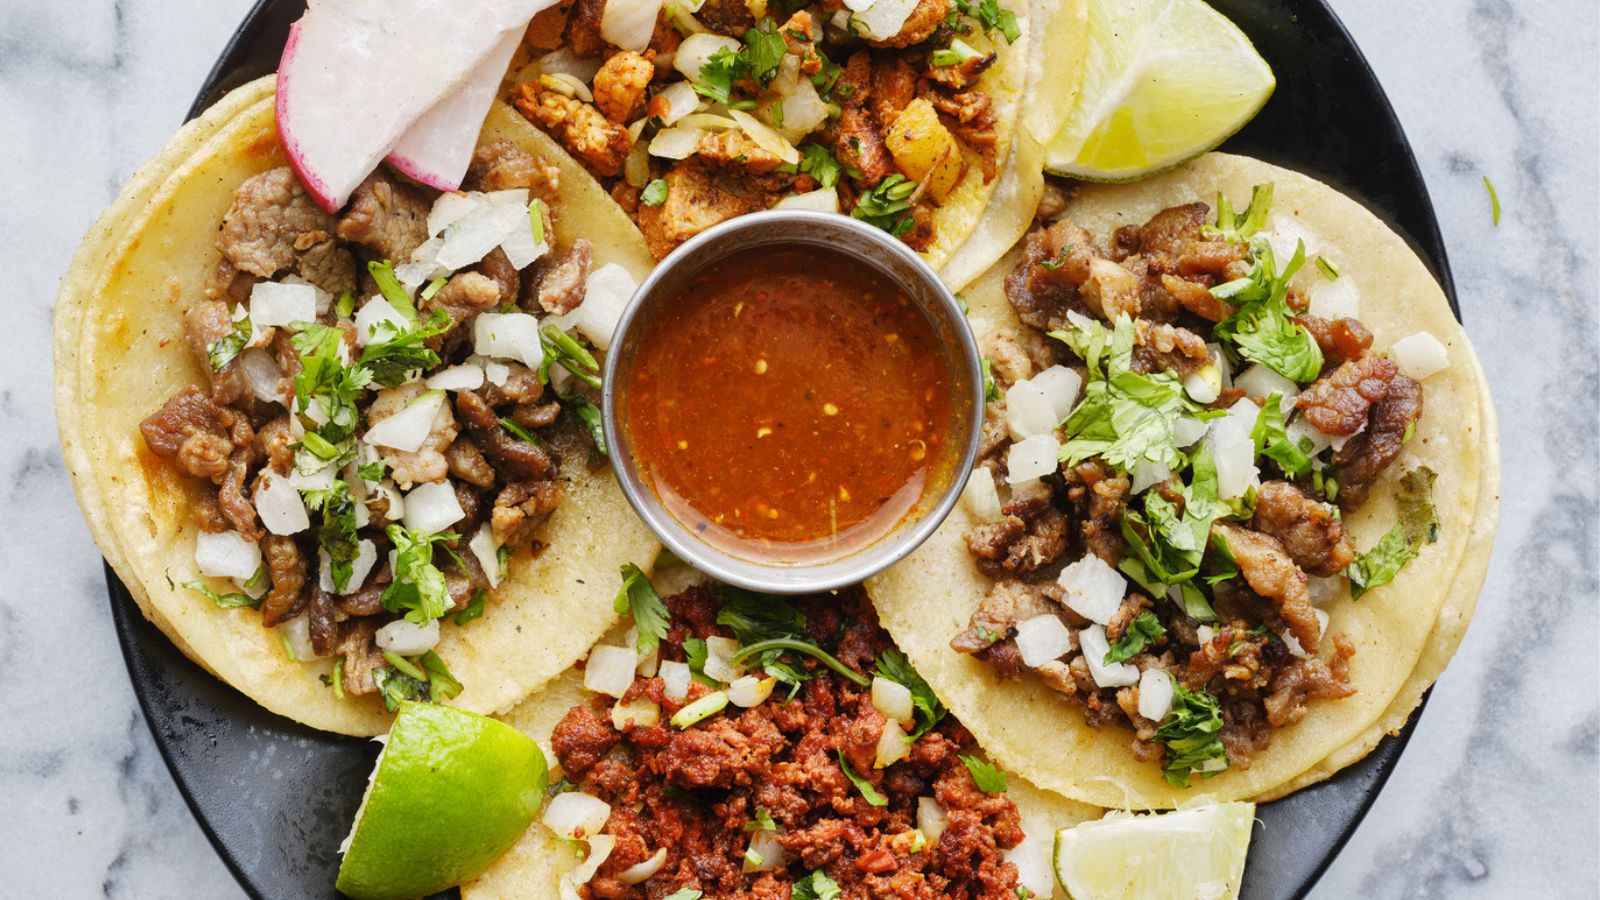 20 Tempting Taco Dishes to Reignite Your Kitchen Creativity